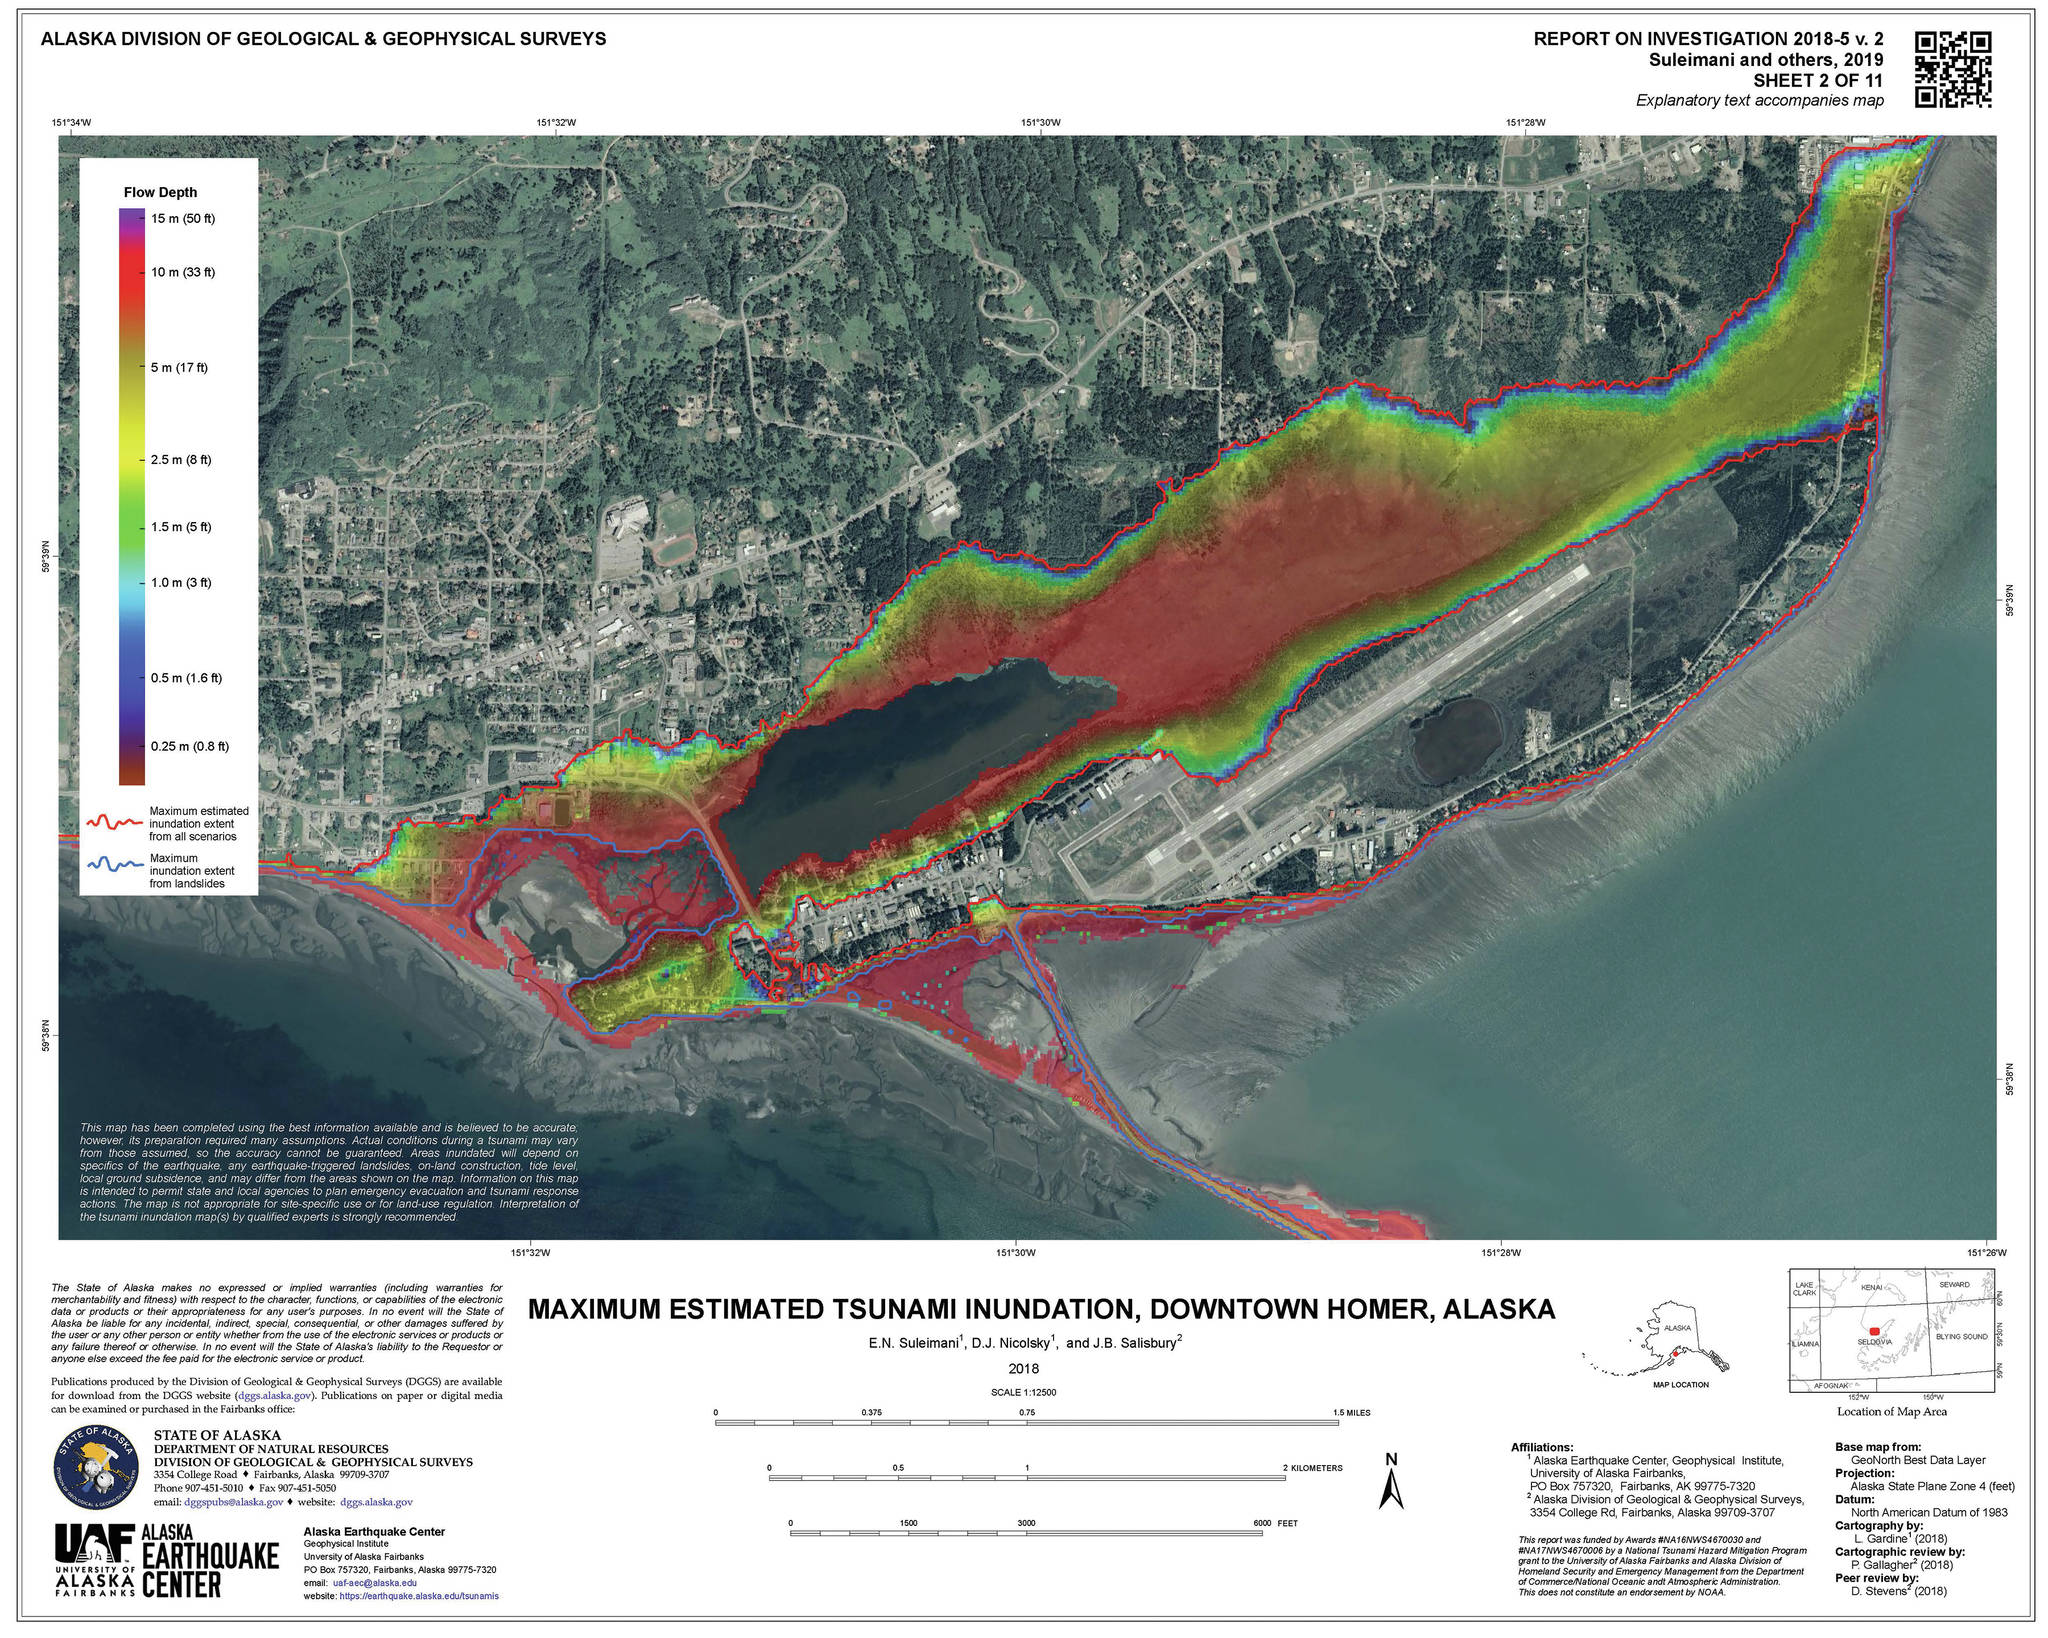 This map shows the estimated tsunami inundation zones as based on research from the Alaska Division of Geological and Geophysical Surveys. (Map courtesy of Alaska Division of Geological and Geophysical Surveys)